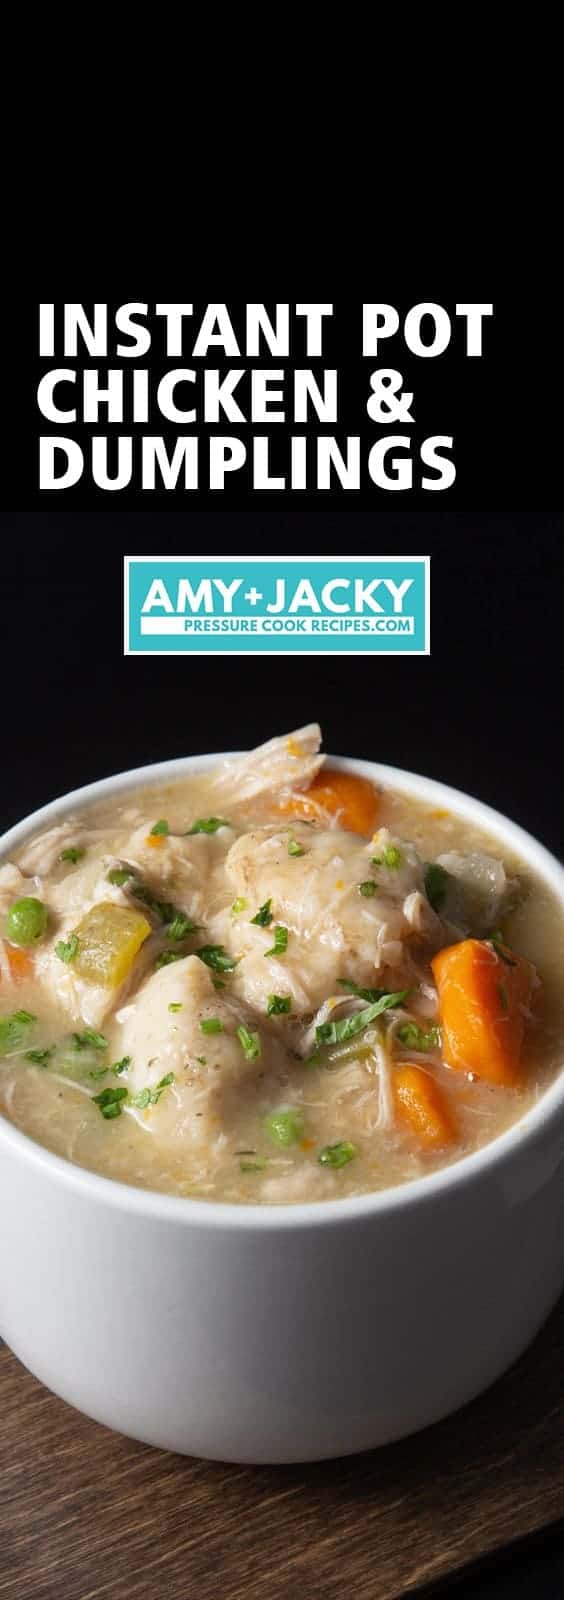 Instant Pot Chicken and Dumplings Recipe (Pressure Cooker Chicken and Dumplings): how to make satisfying Chicken and Dumplings - classic comfort food with tender chicken and fluffy homemade dumplings in aromatic chicken broth. An all-time family favorite! #instantpot #instapot #instantpotrecipes #pressurecooker #recipes #chickenrecipes #southern #soul